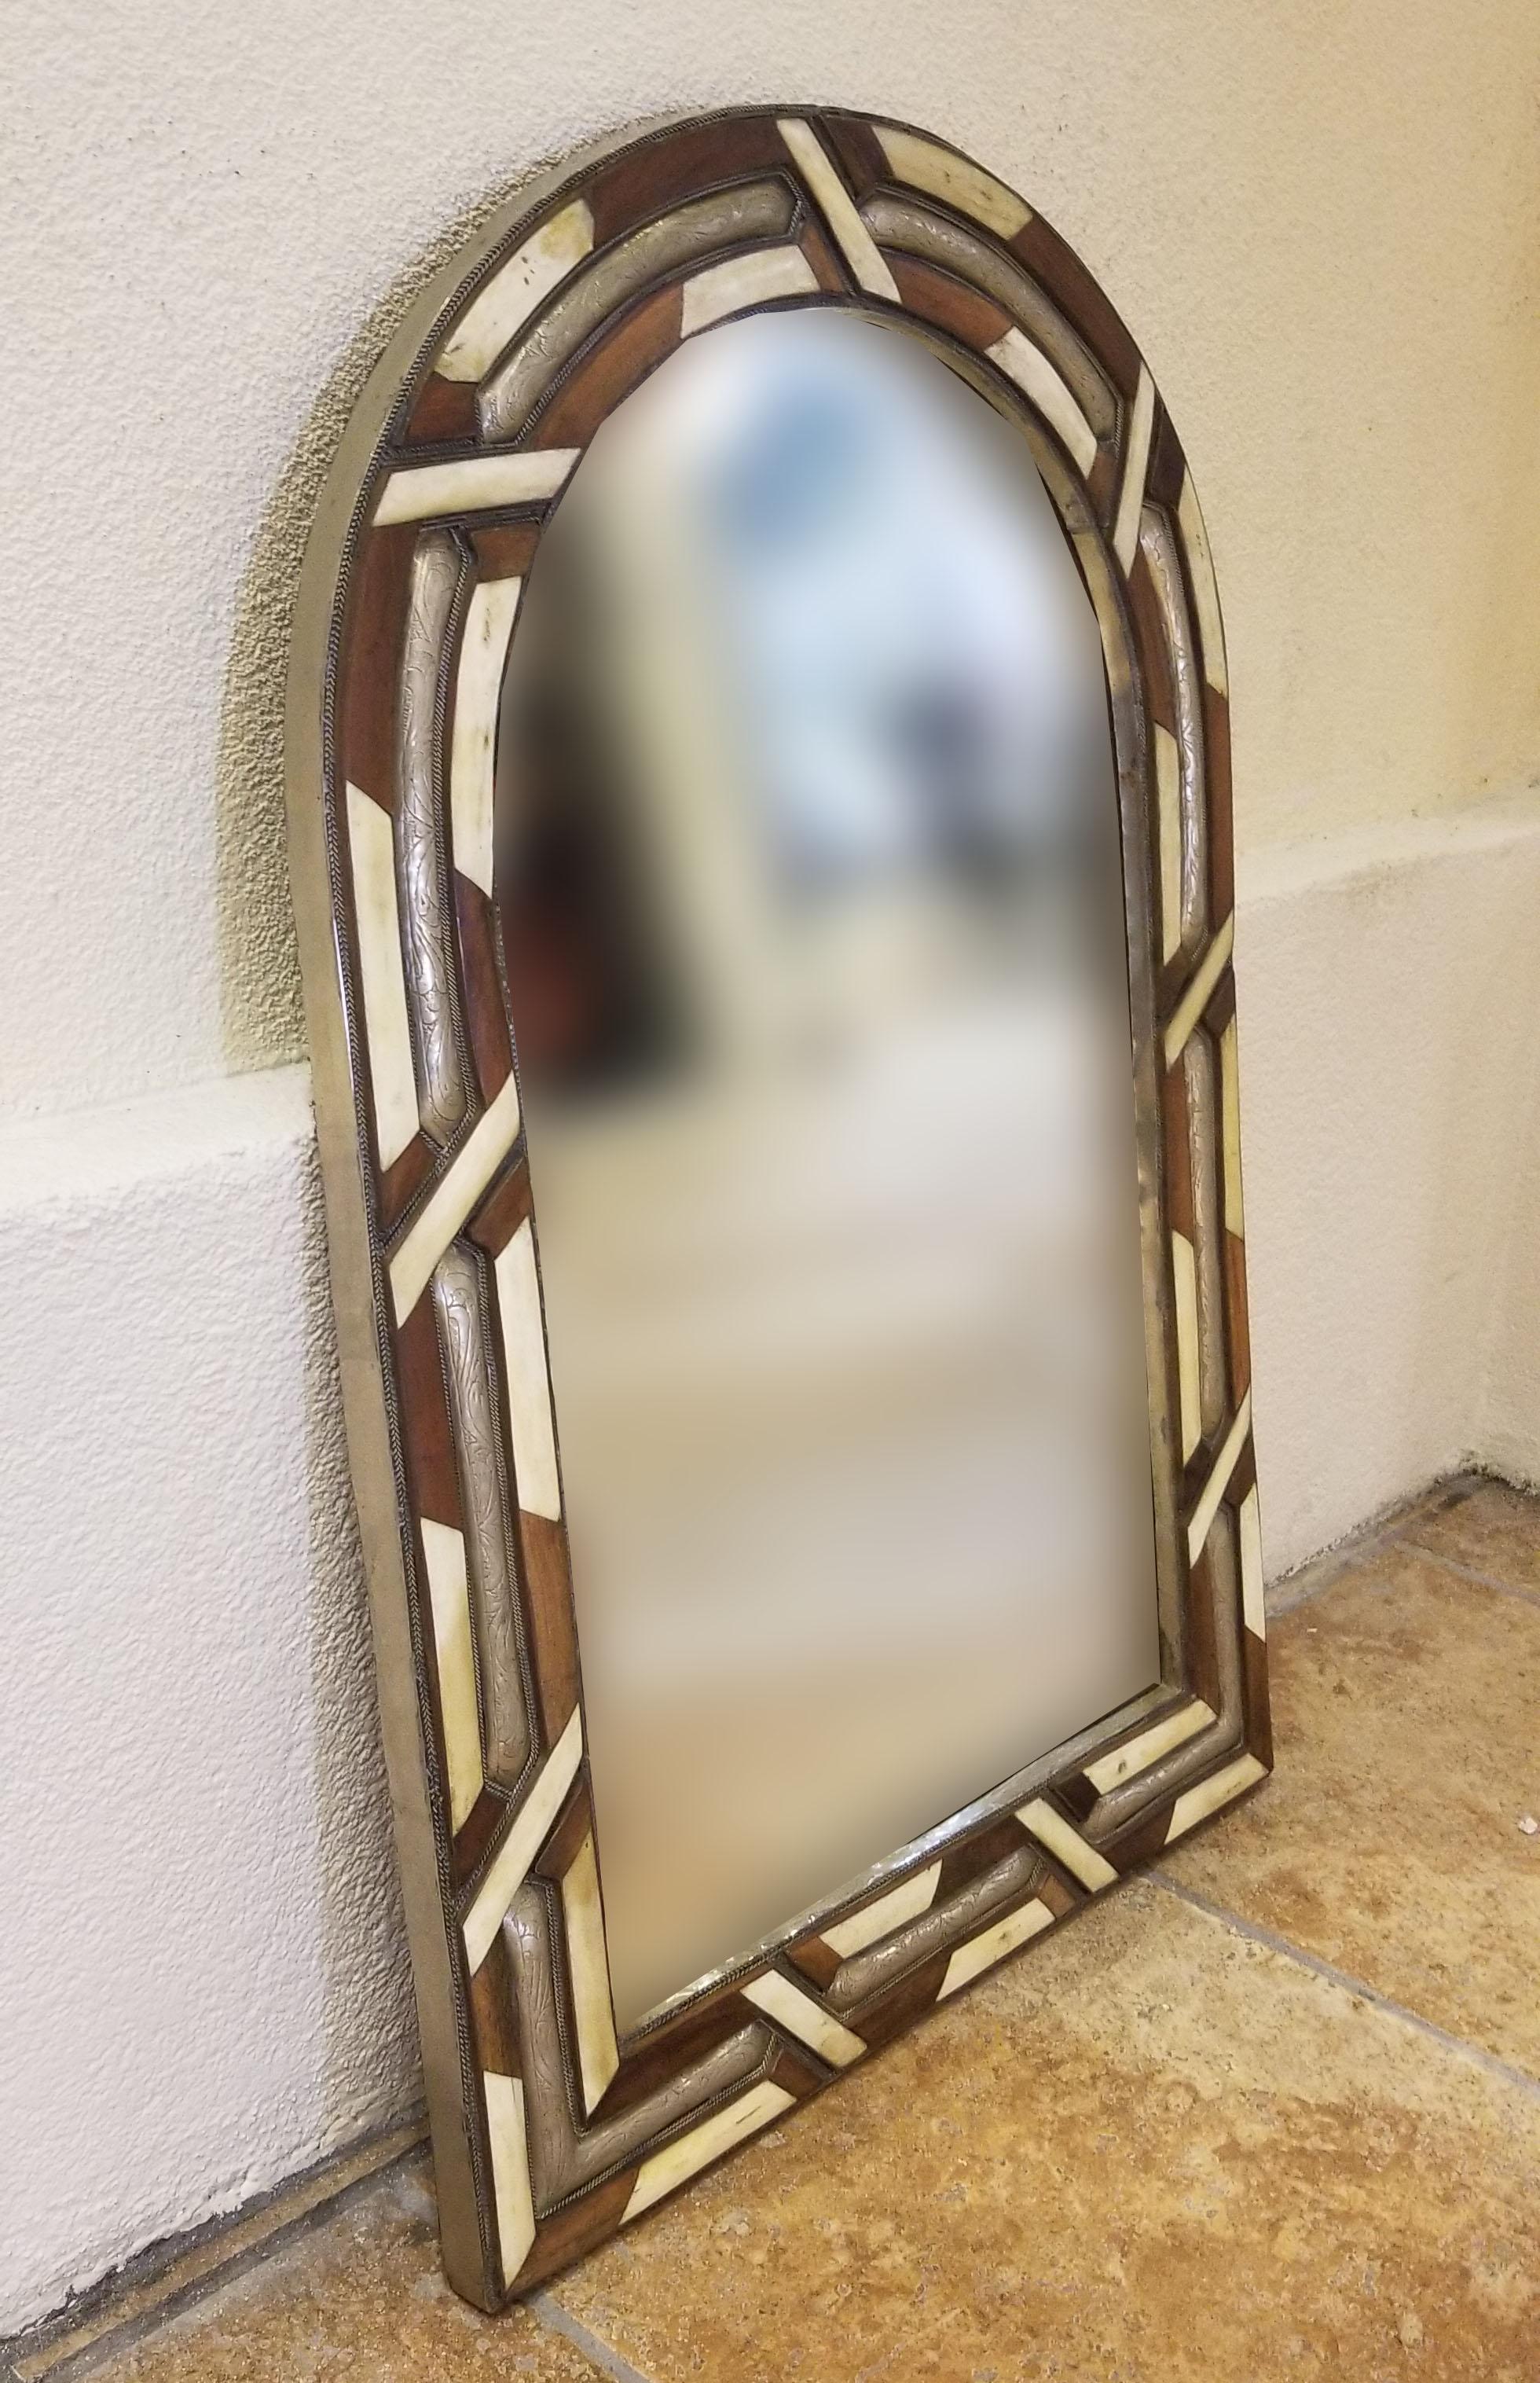 Small size camel bone inlay Moroccan mirror. Made in the city of Marrakech. Rectangular shape with an arched top, and measuring approximately 27